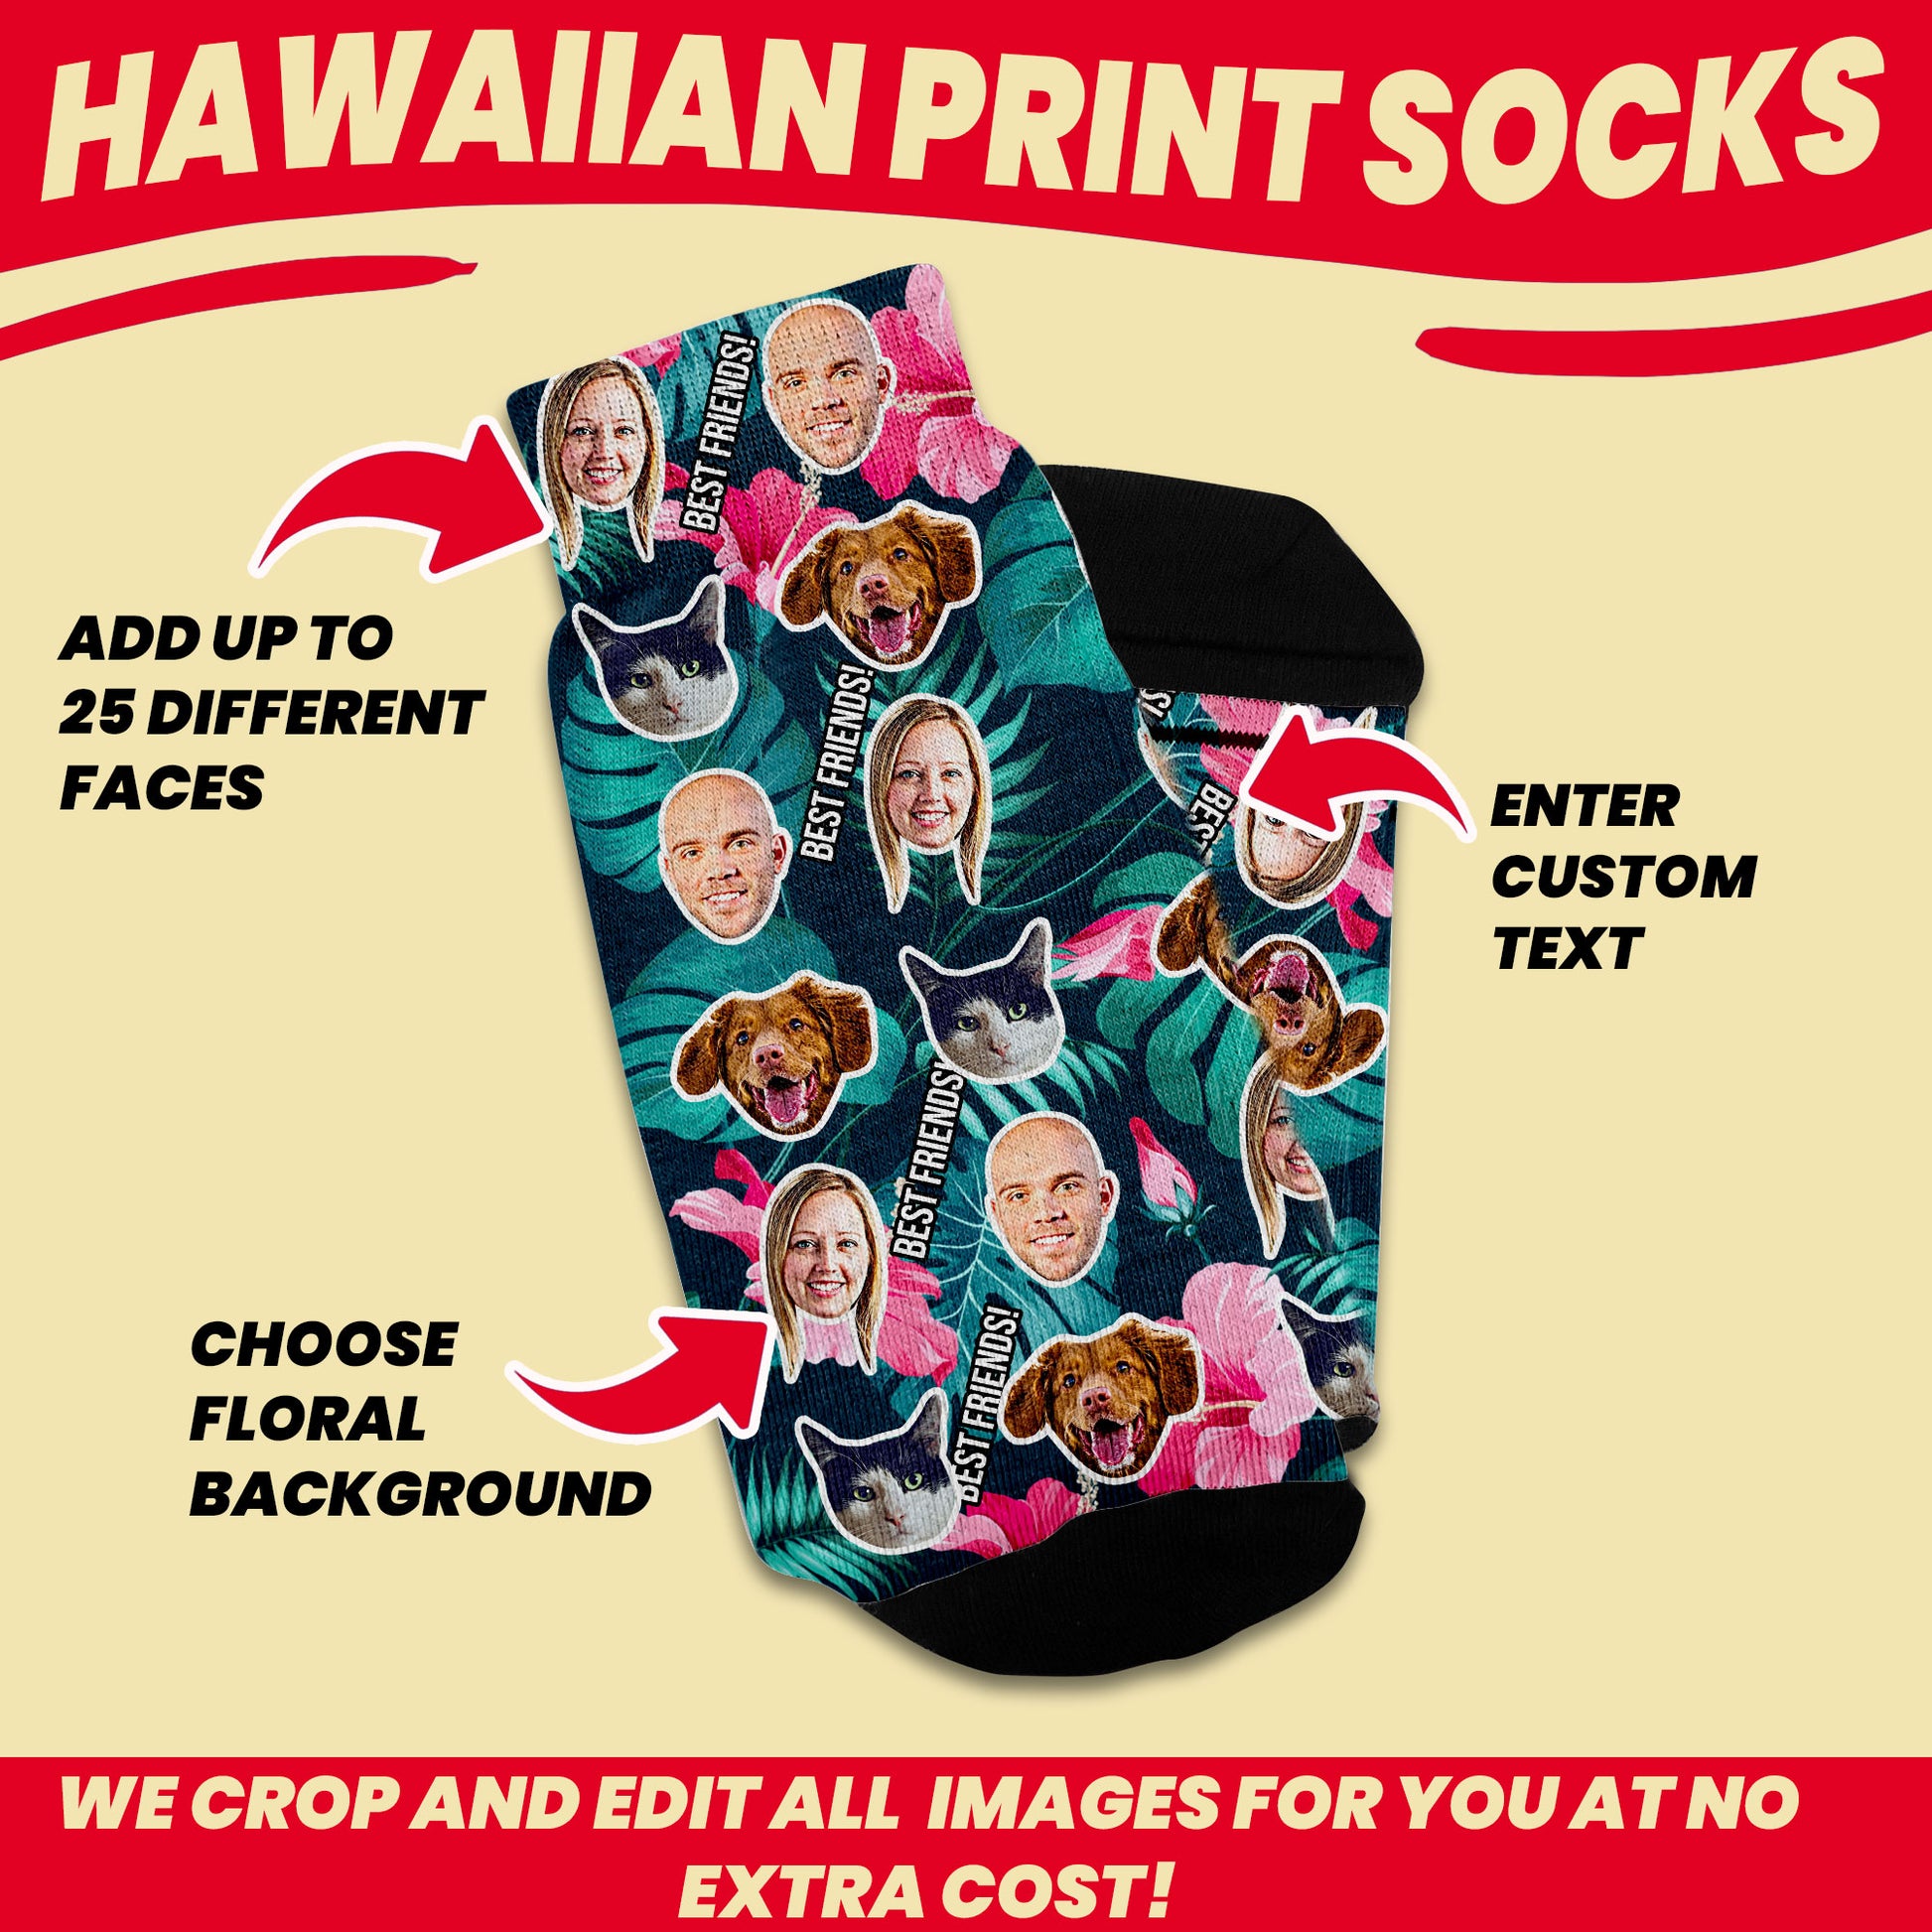 personalized hawaiian shirt style socks with your design. Add 25 faces, add text and choose your own hawaiian background